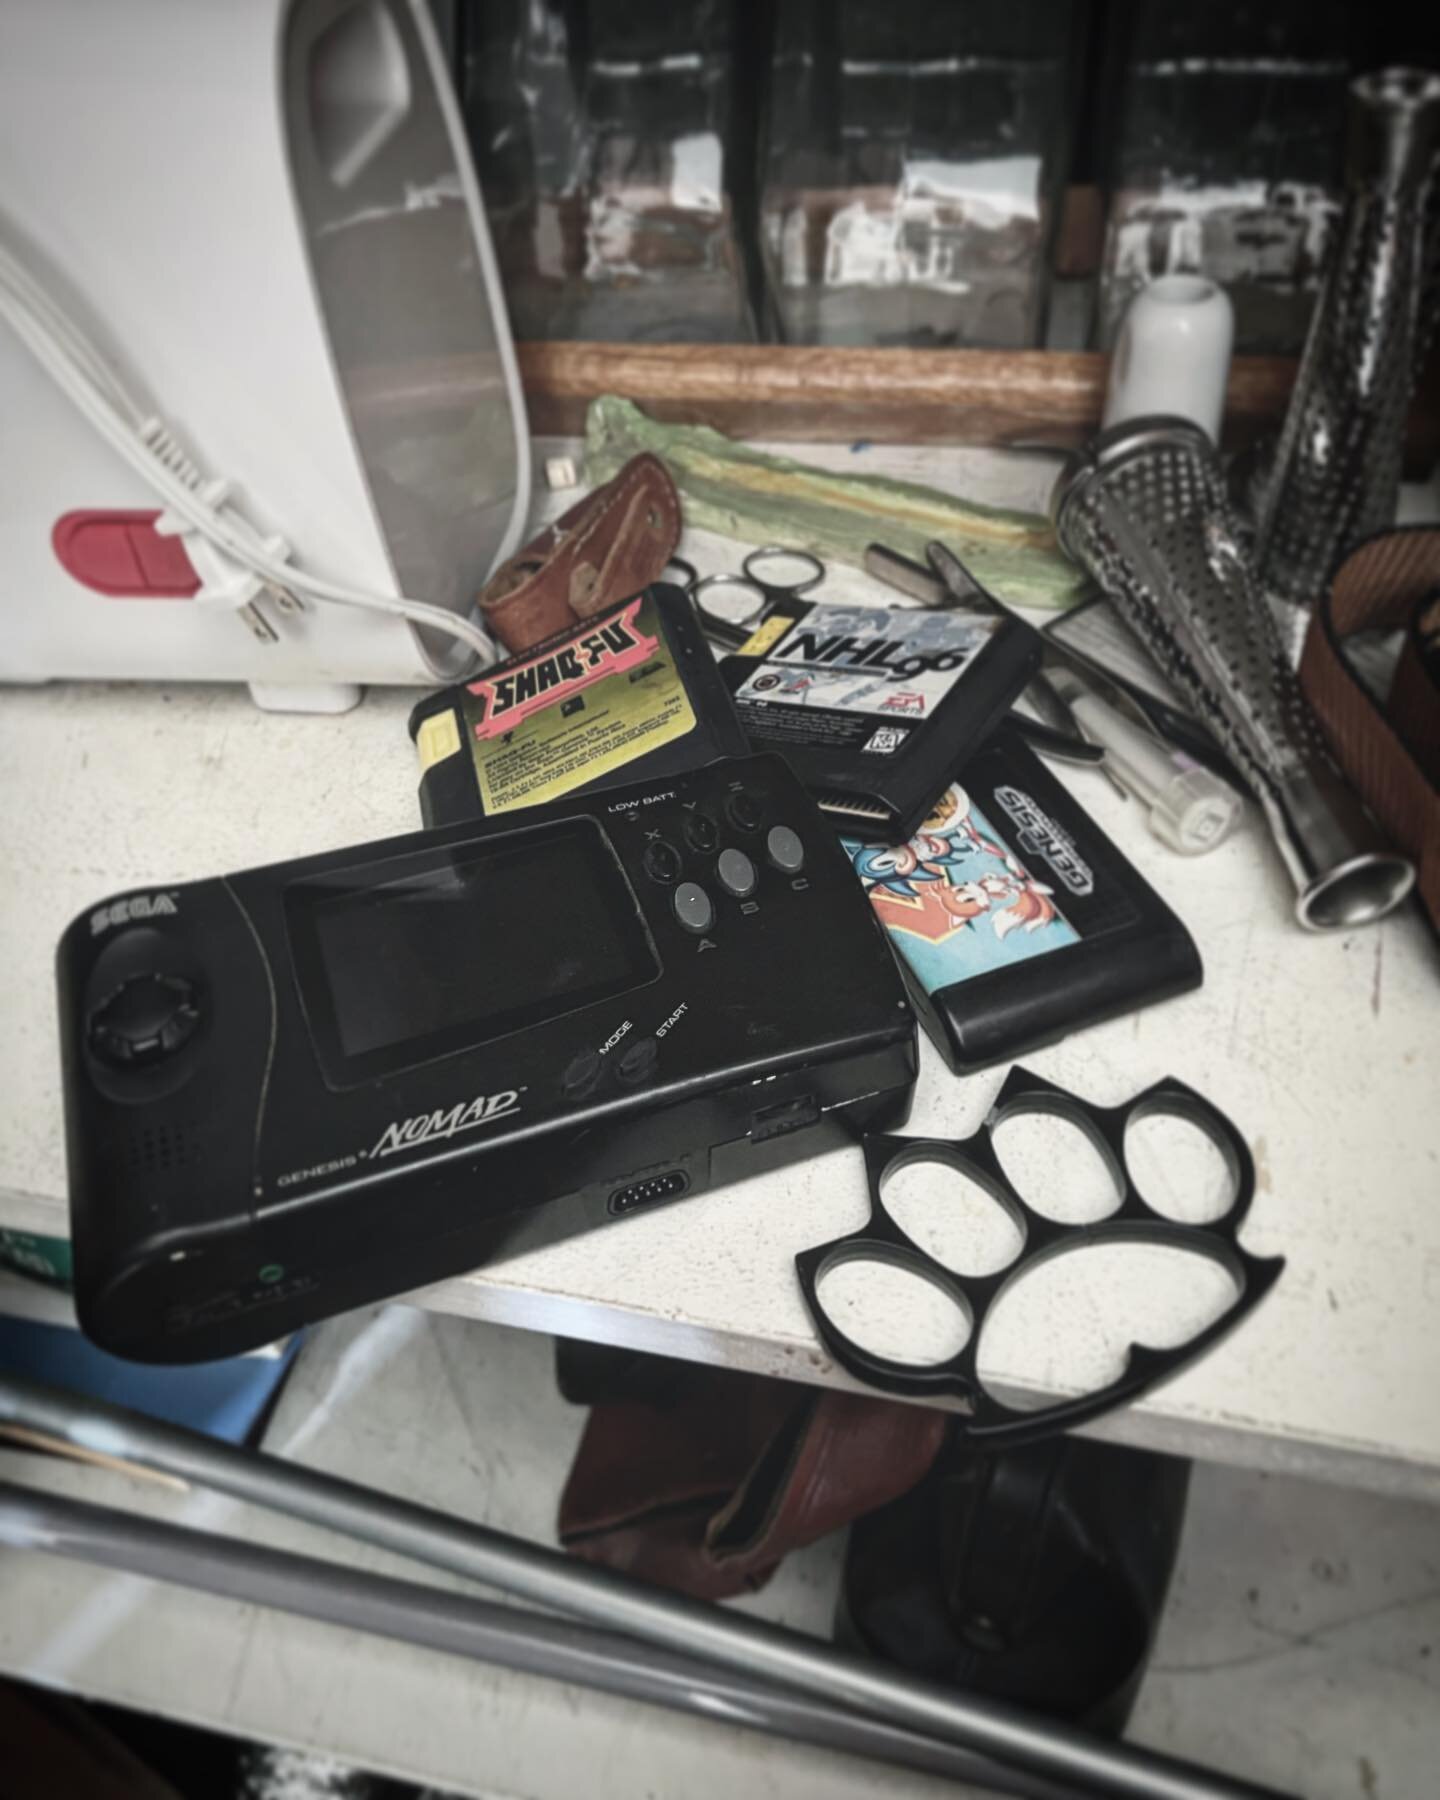 Looking for an XLR cable at my pop&rsquo;s&hellip;. Found a Sega Nomad with Shaq-Fu and brass knuckles&hellip;. My youth was a bit much.